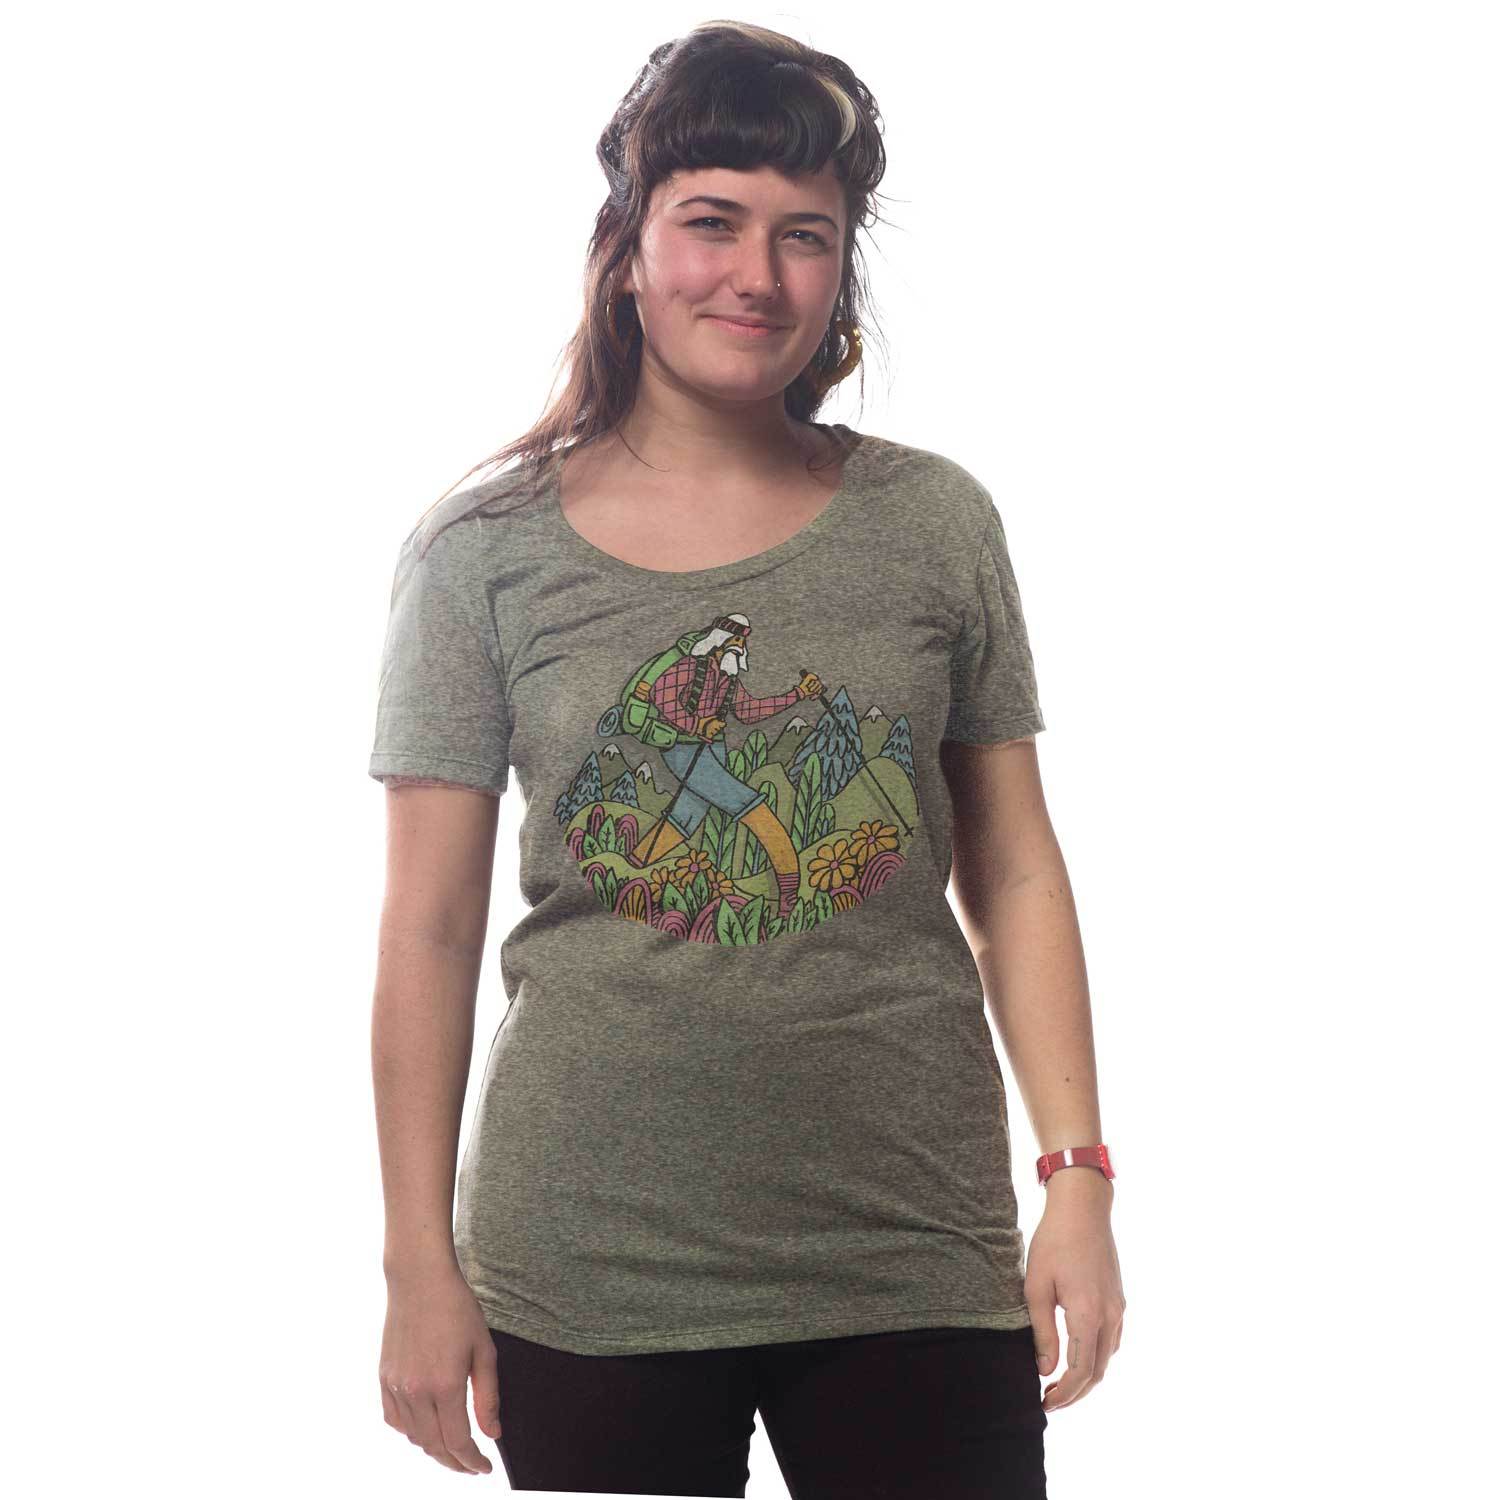 Women's Wise Hiker Artsy Vintage Mountain Graphic Tee | Retro Outdoorsy T-shirt | Solid Threads